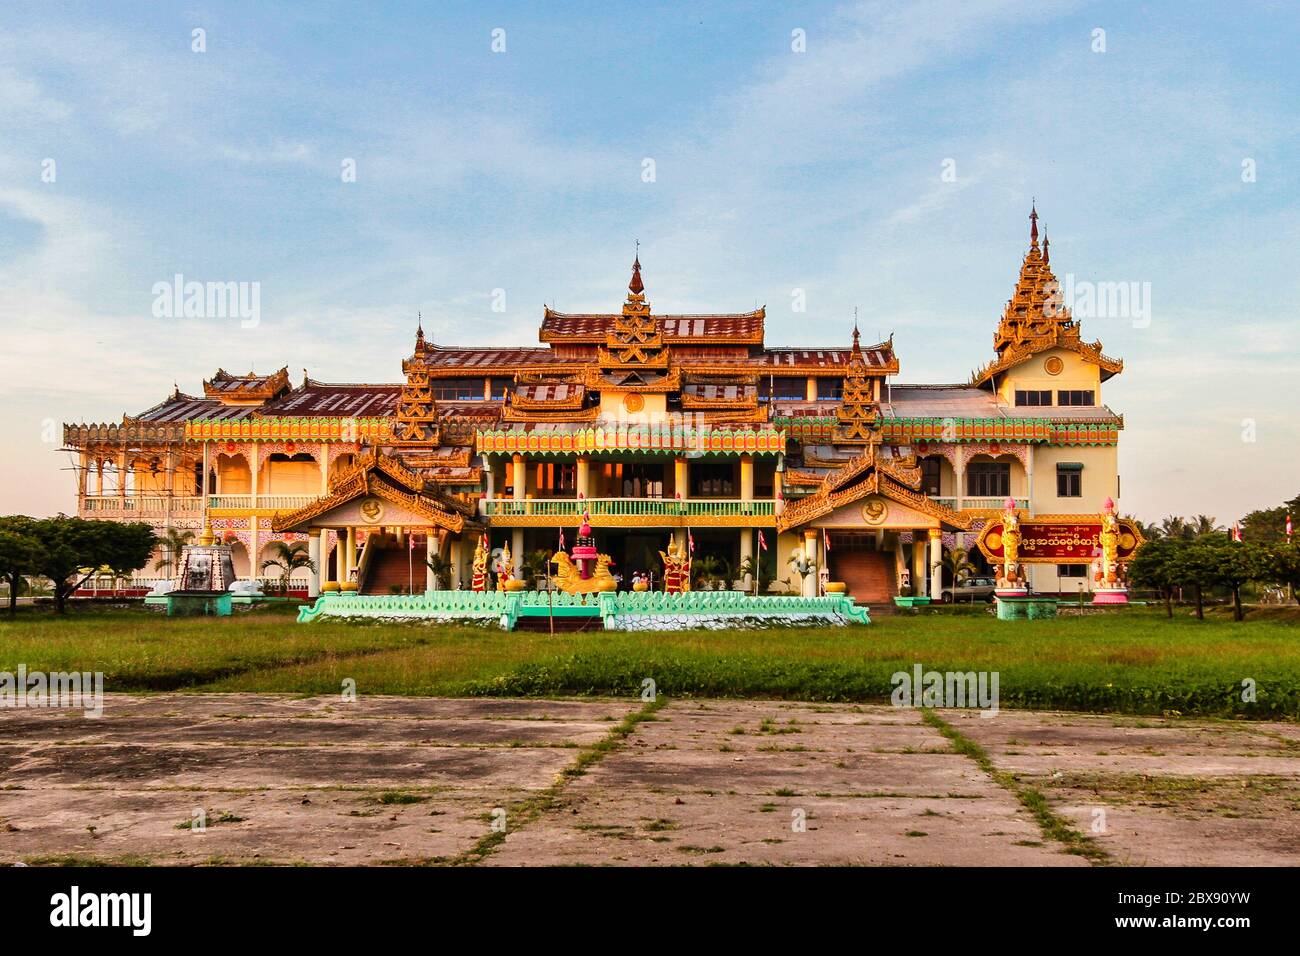 Shwemawdaw Pagoda in Bago Pegu, Myanmar. It is often referred to as the Golden God Temple. Stock Photo